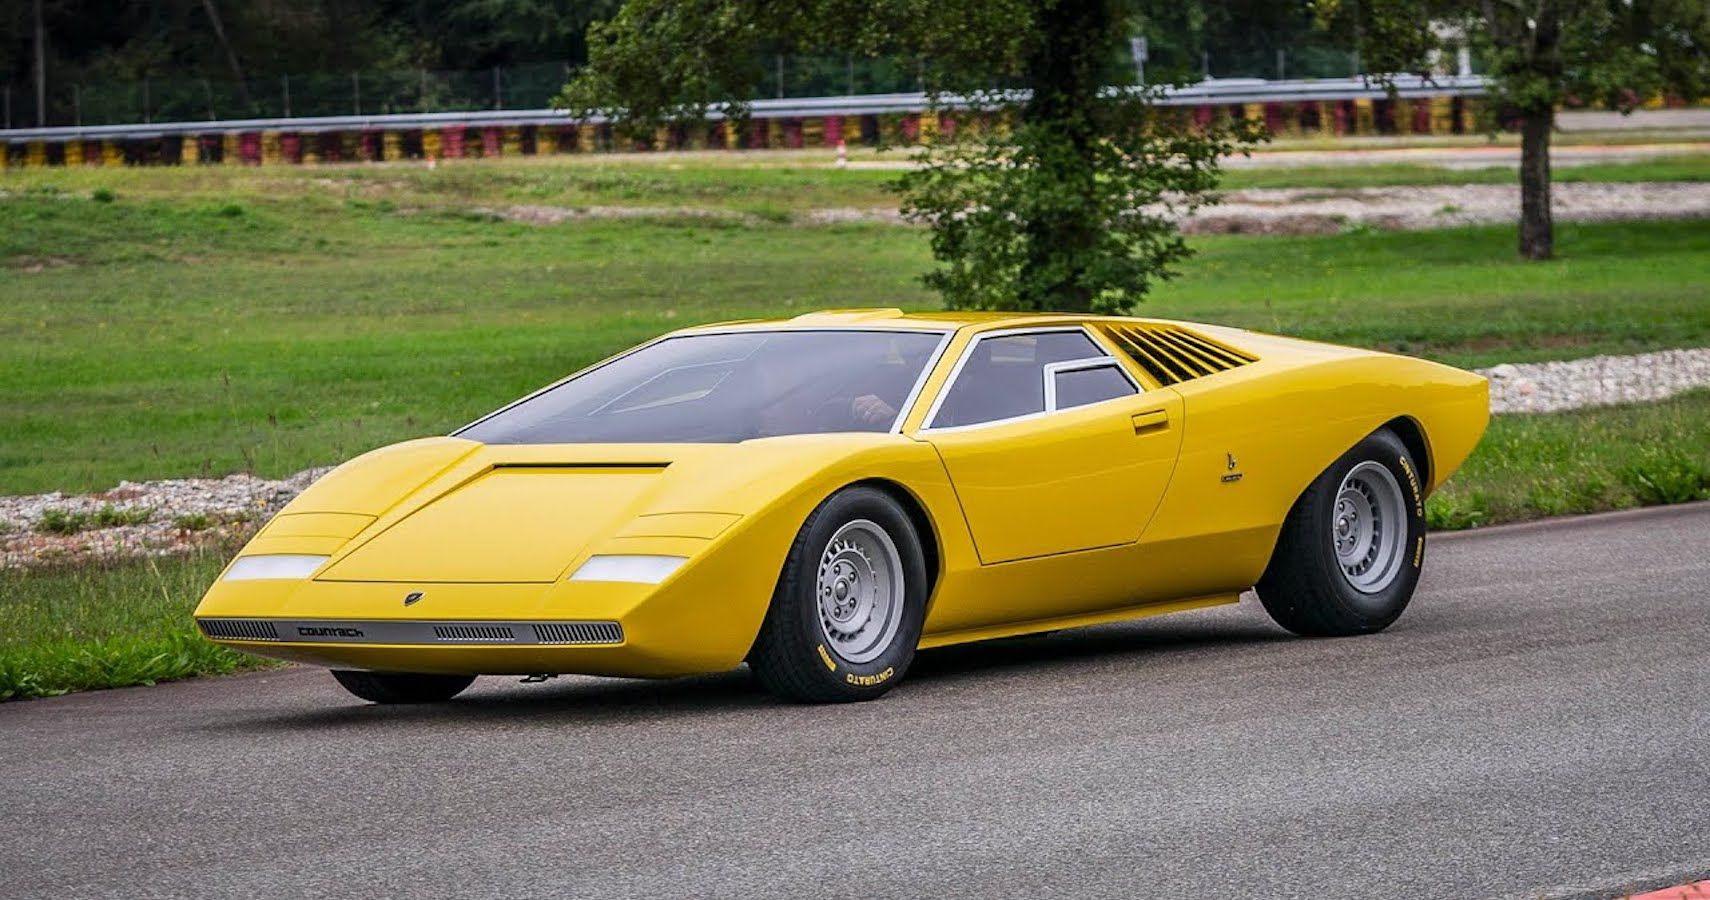 See This Recreated Lamborghini Countach And Its New Owner Experience A Test Drive